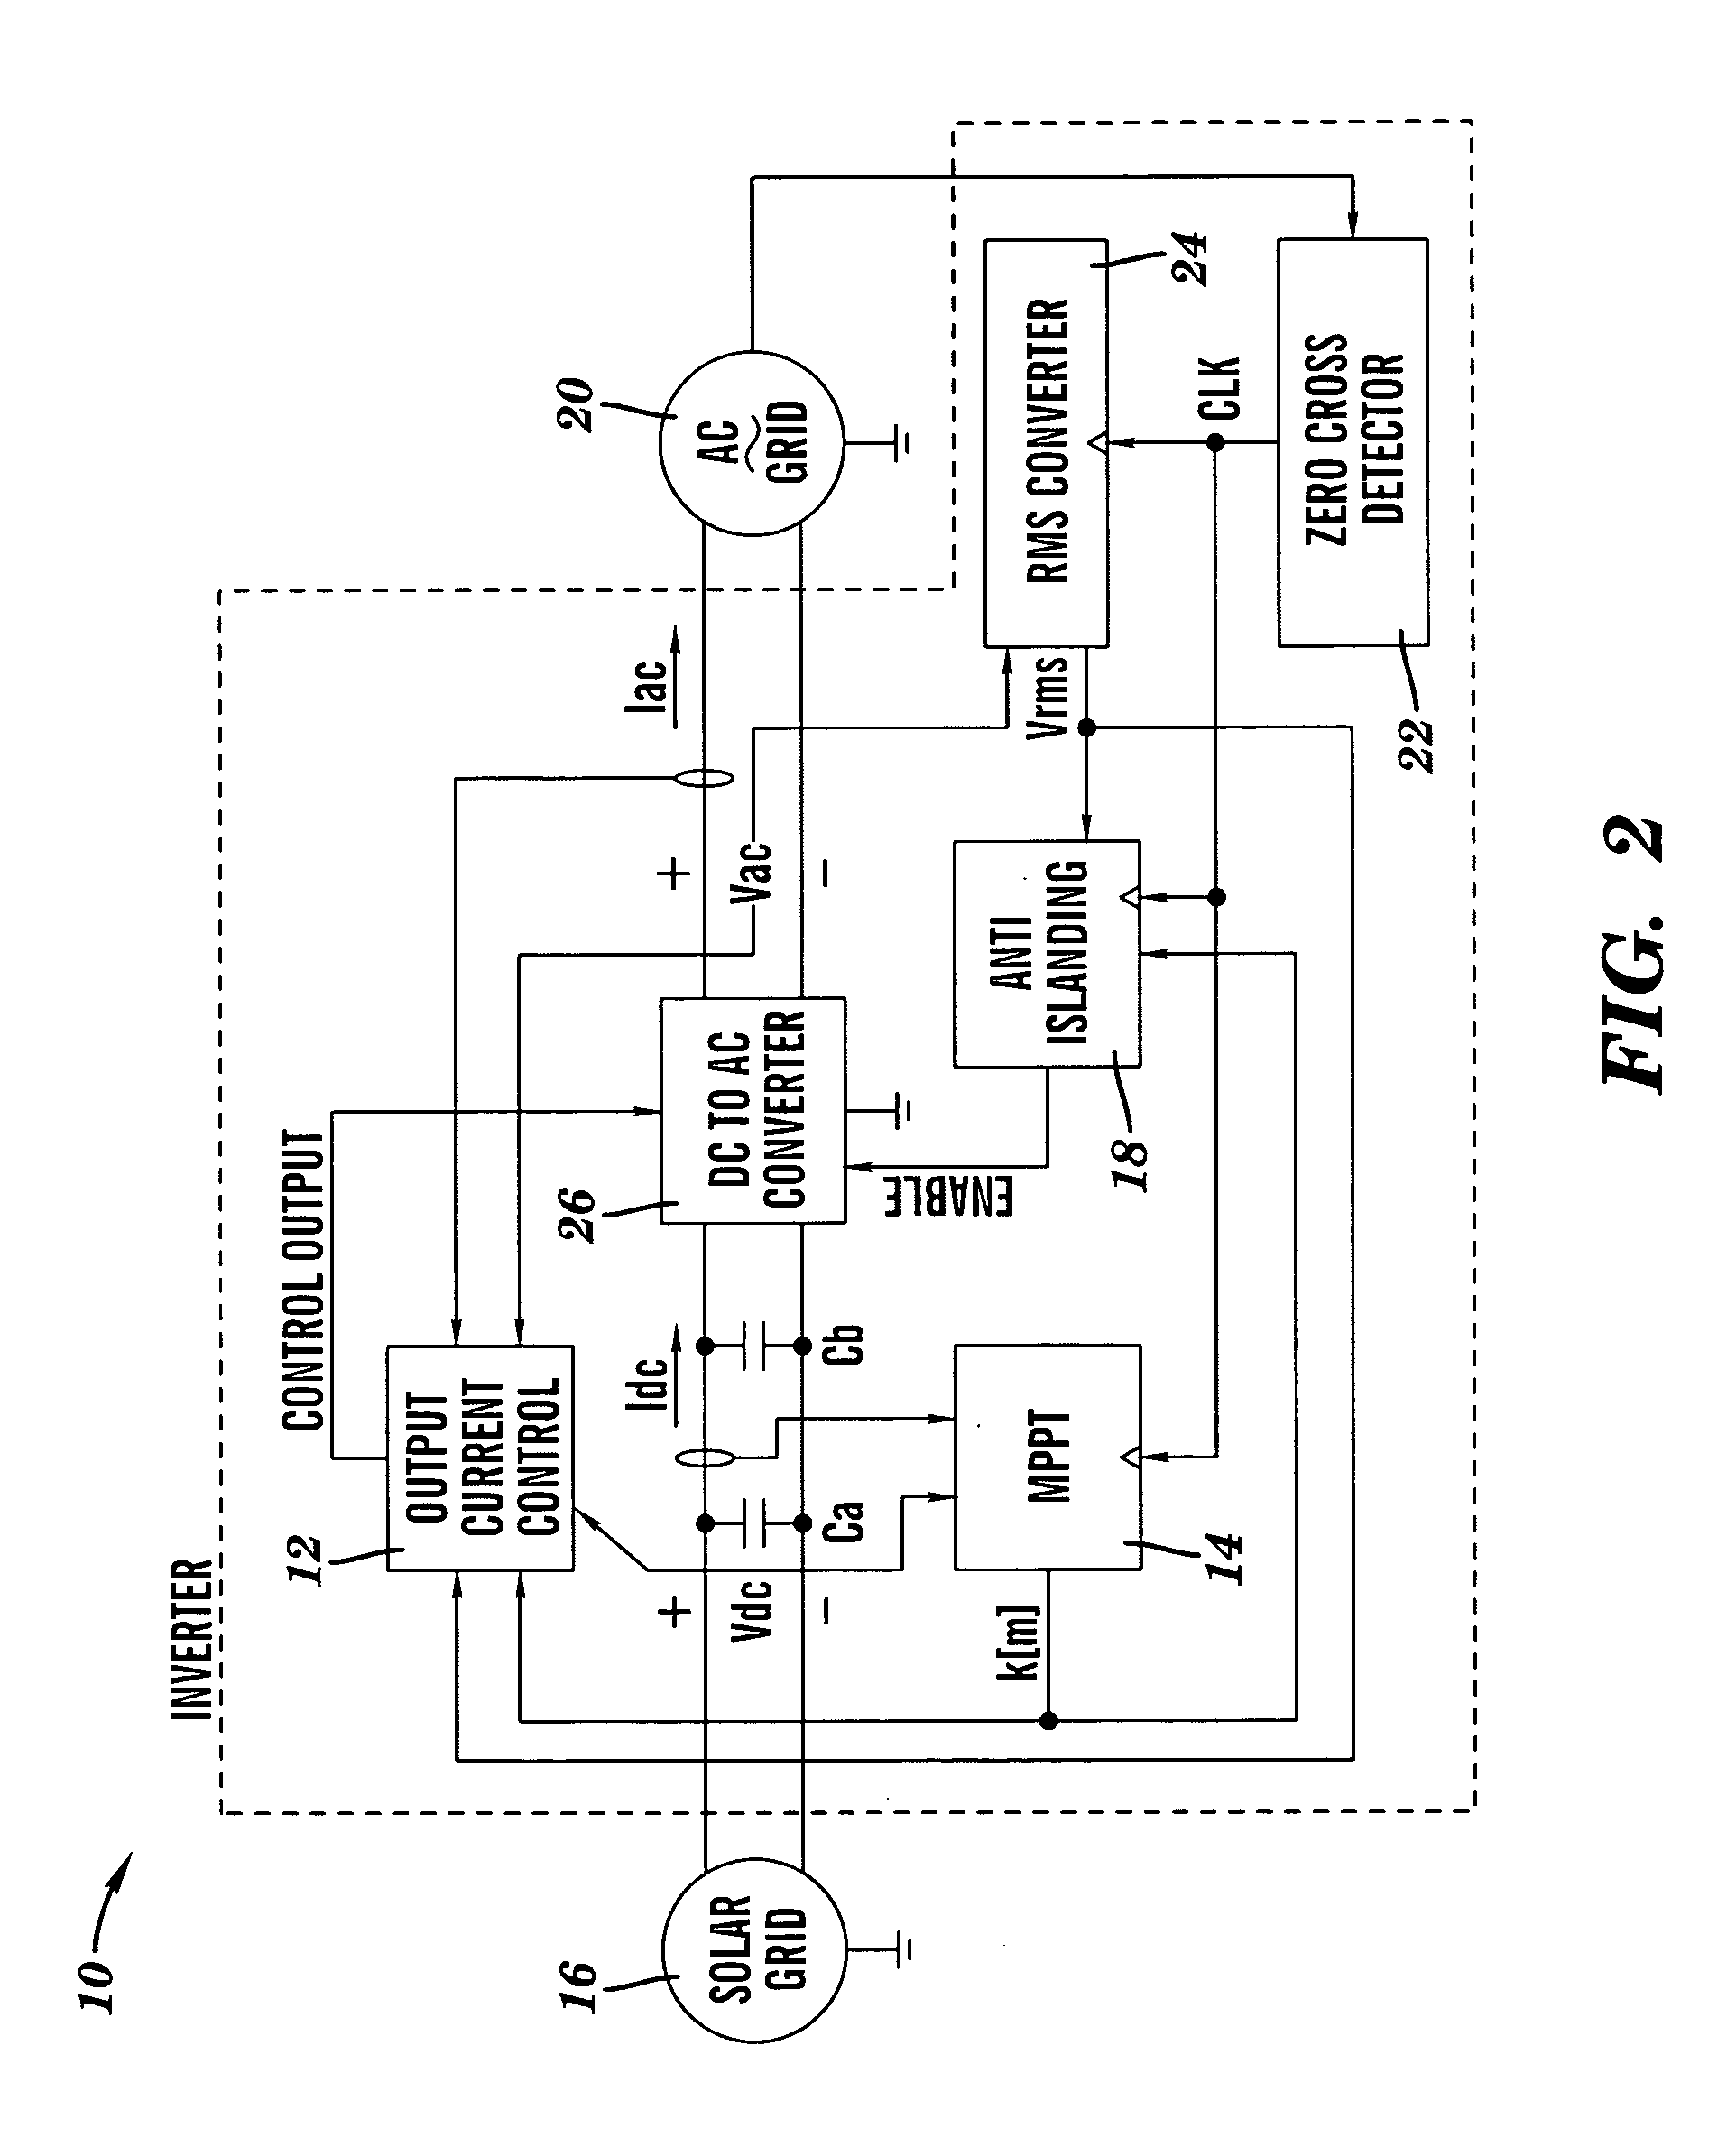 Inverter control methodology for distributed generation sources connected to a utility grid